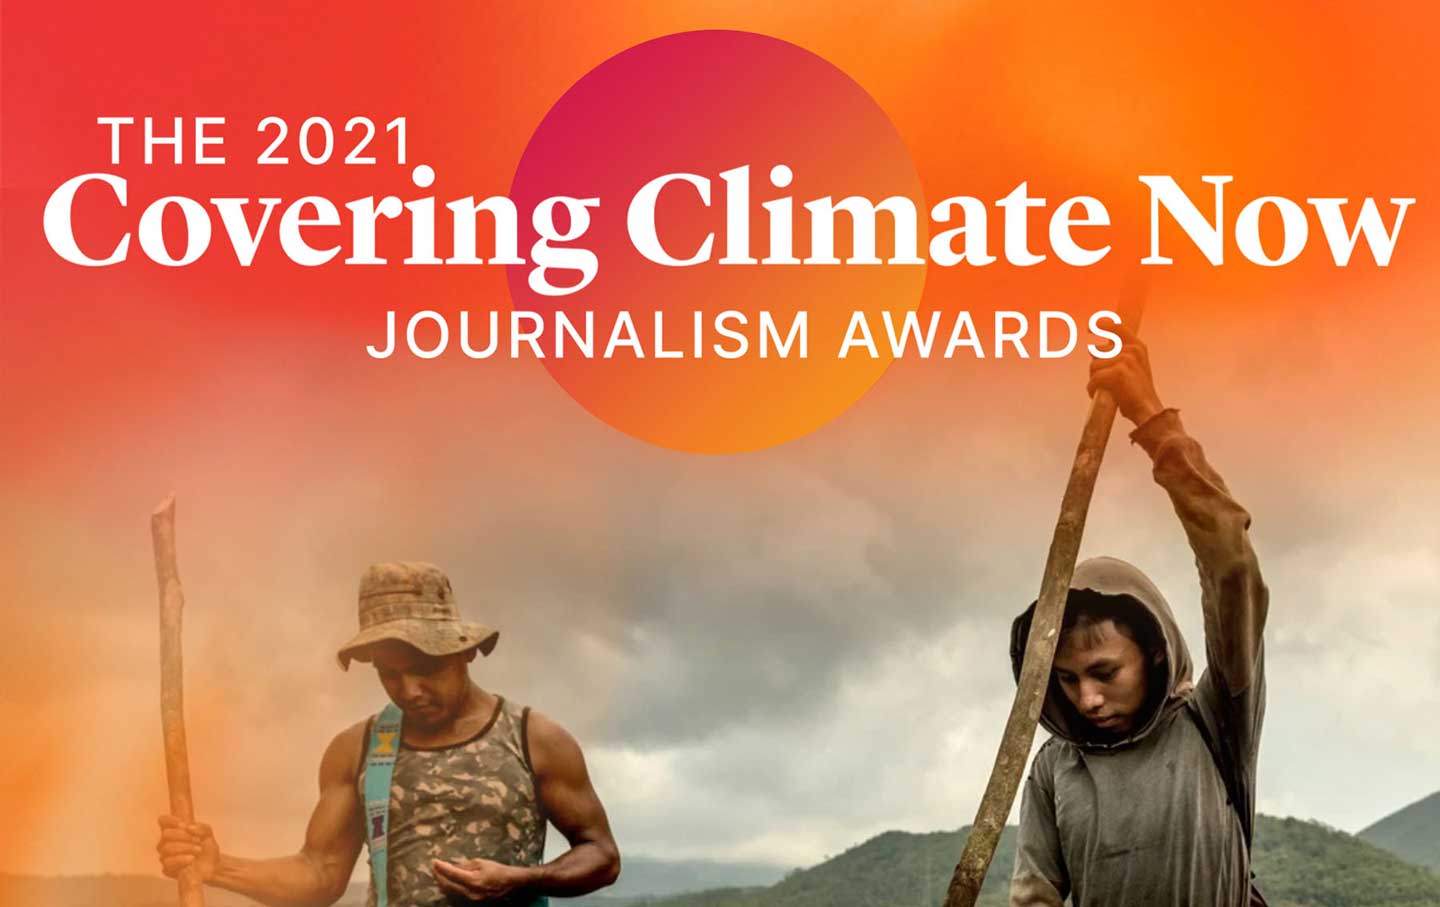 Watch the 2021 Covering Climate Now Journalism Awards thumbnail